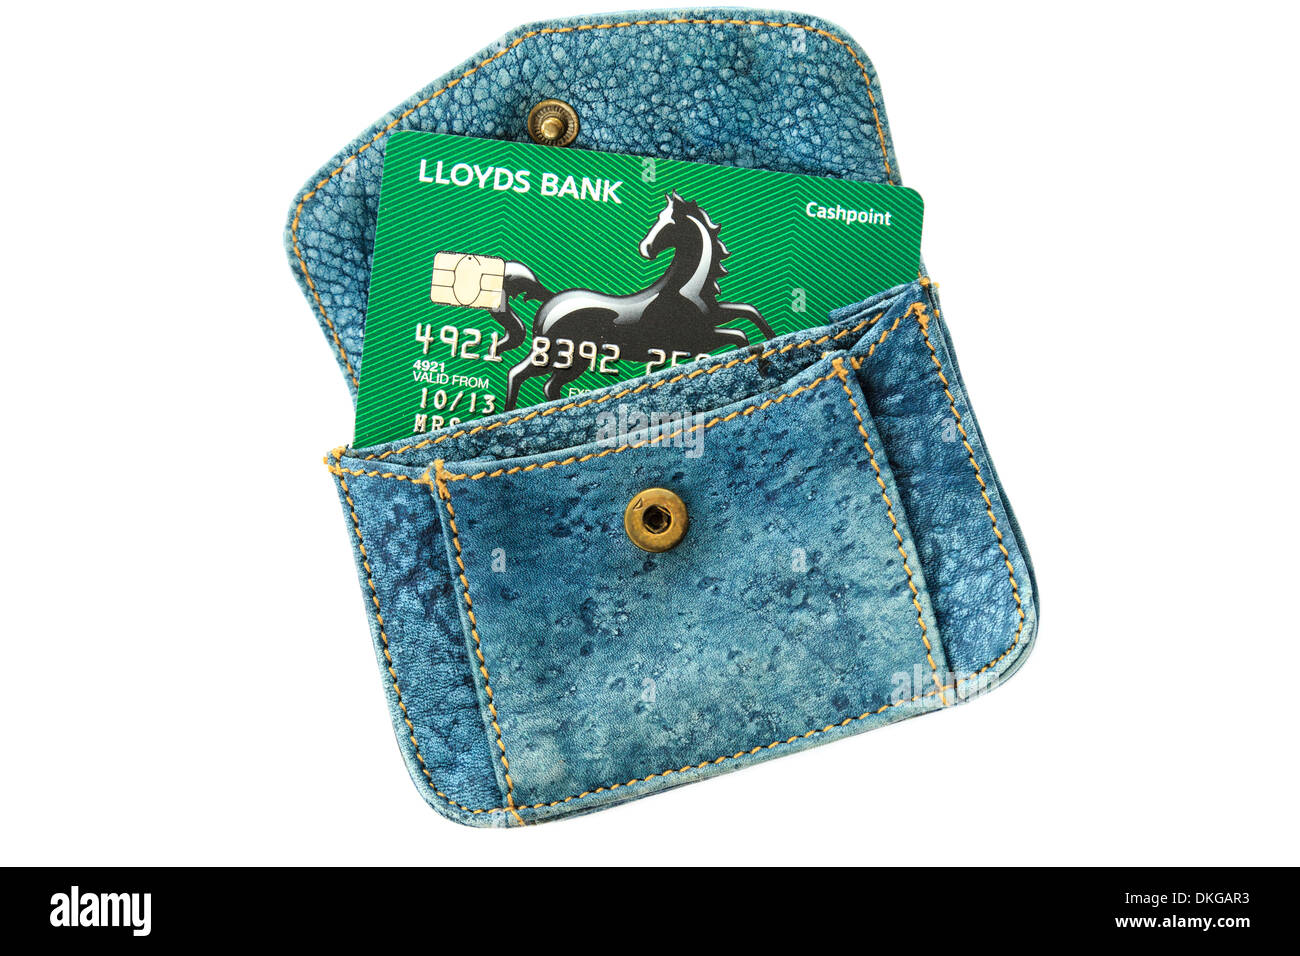 New Lloyds Bank cashpoint card in a blue purse isolated on a plain white background. England, UK, Britain Stock Photo